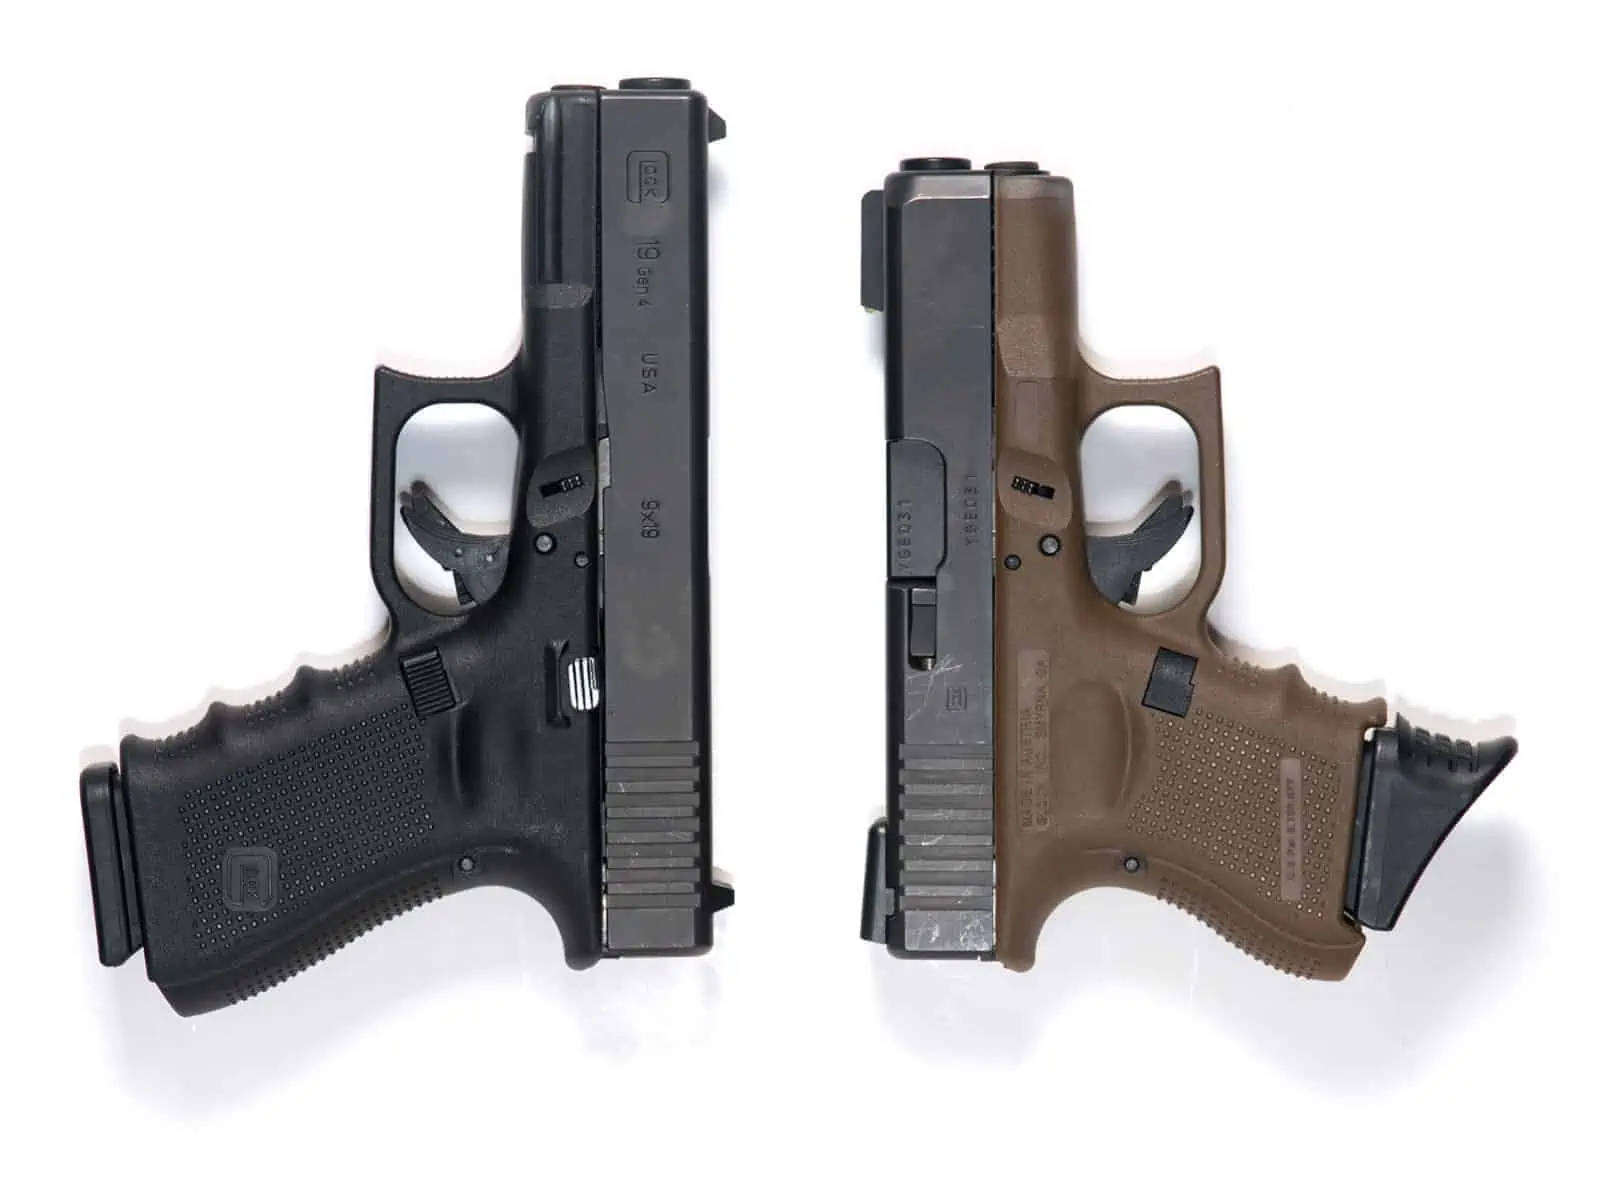 Glock 19 vs Glock 26 - Which Should You Choose? [Simple Guide]